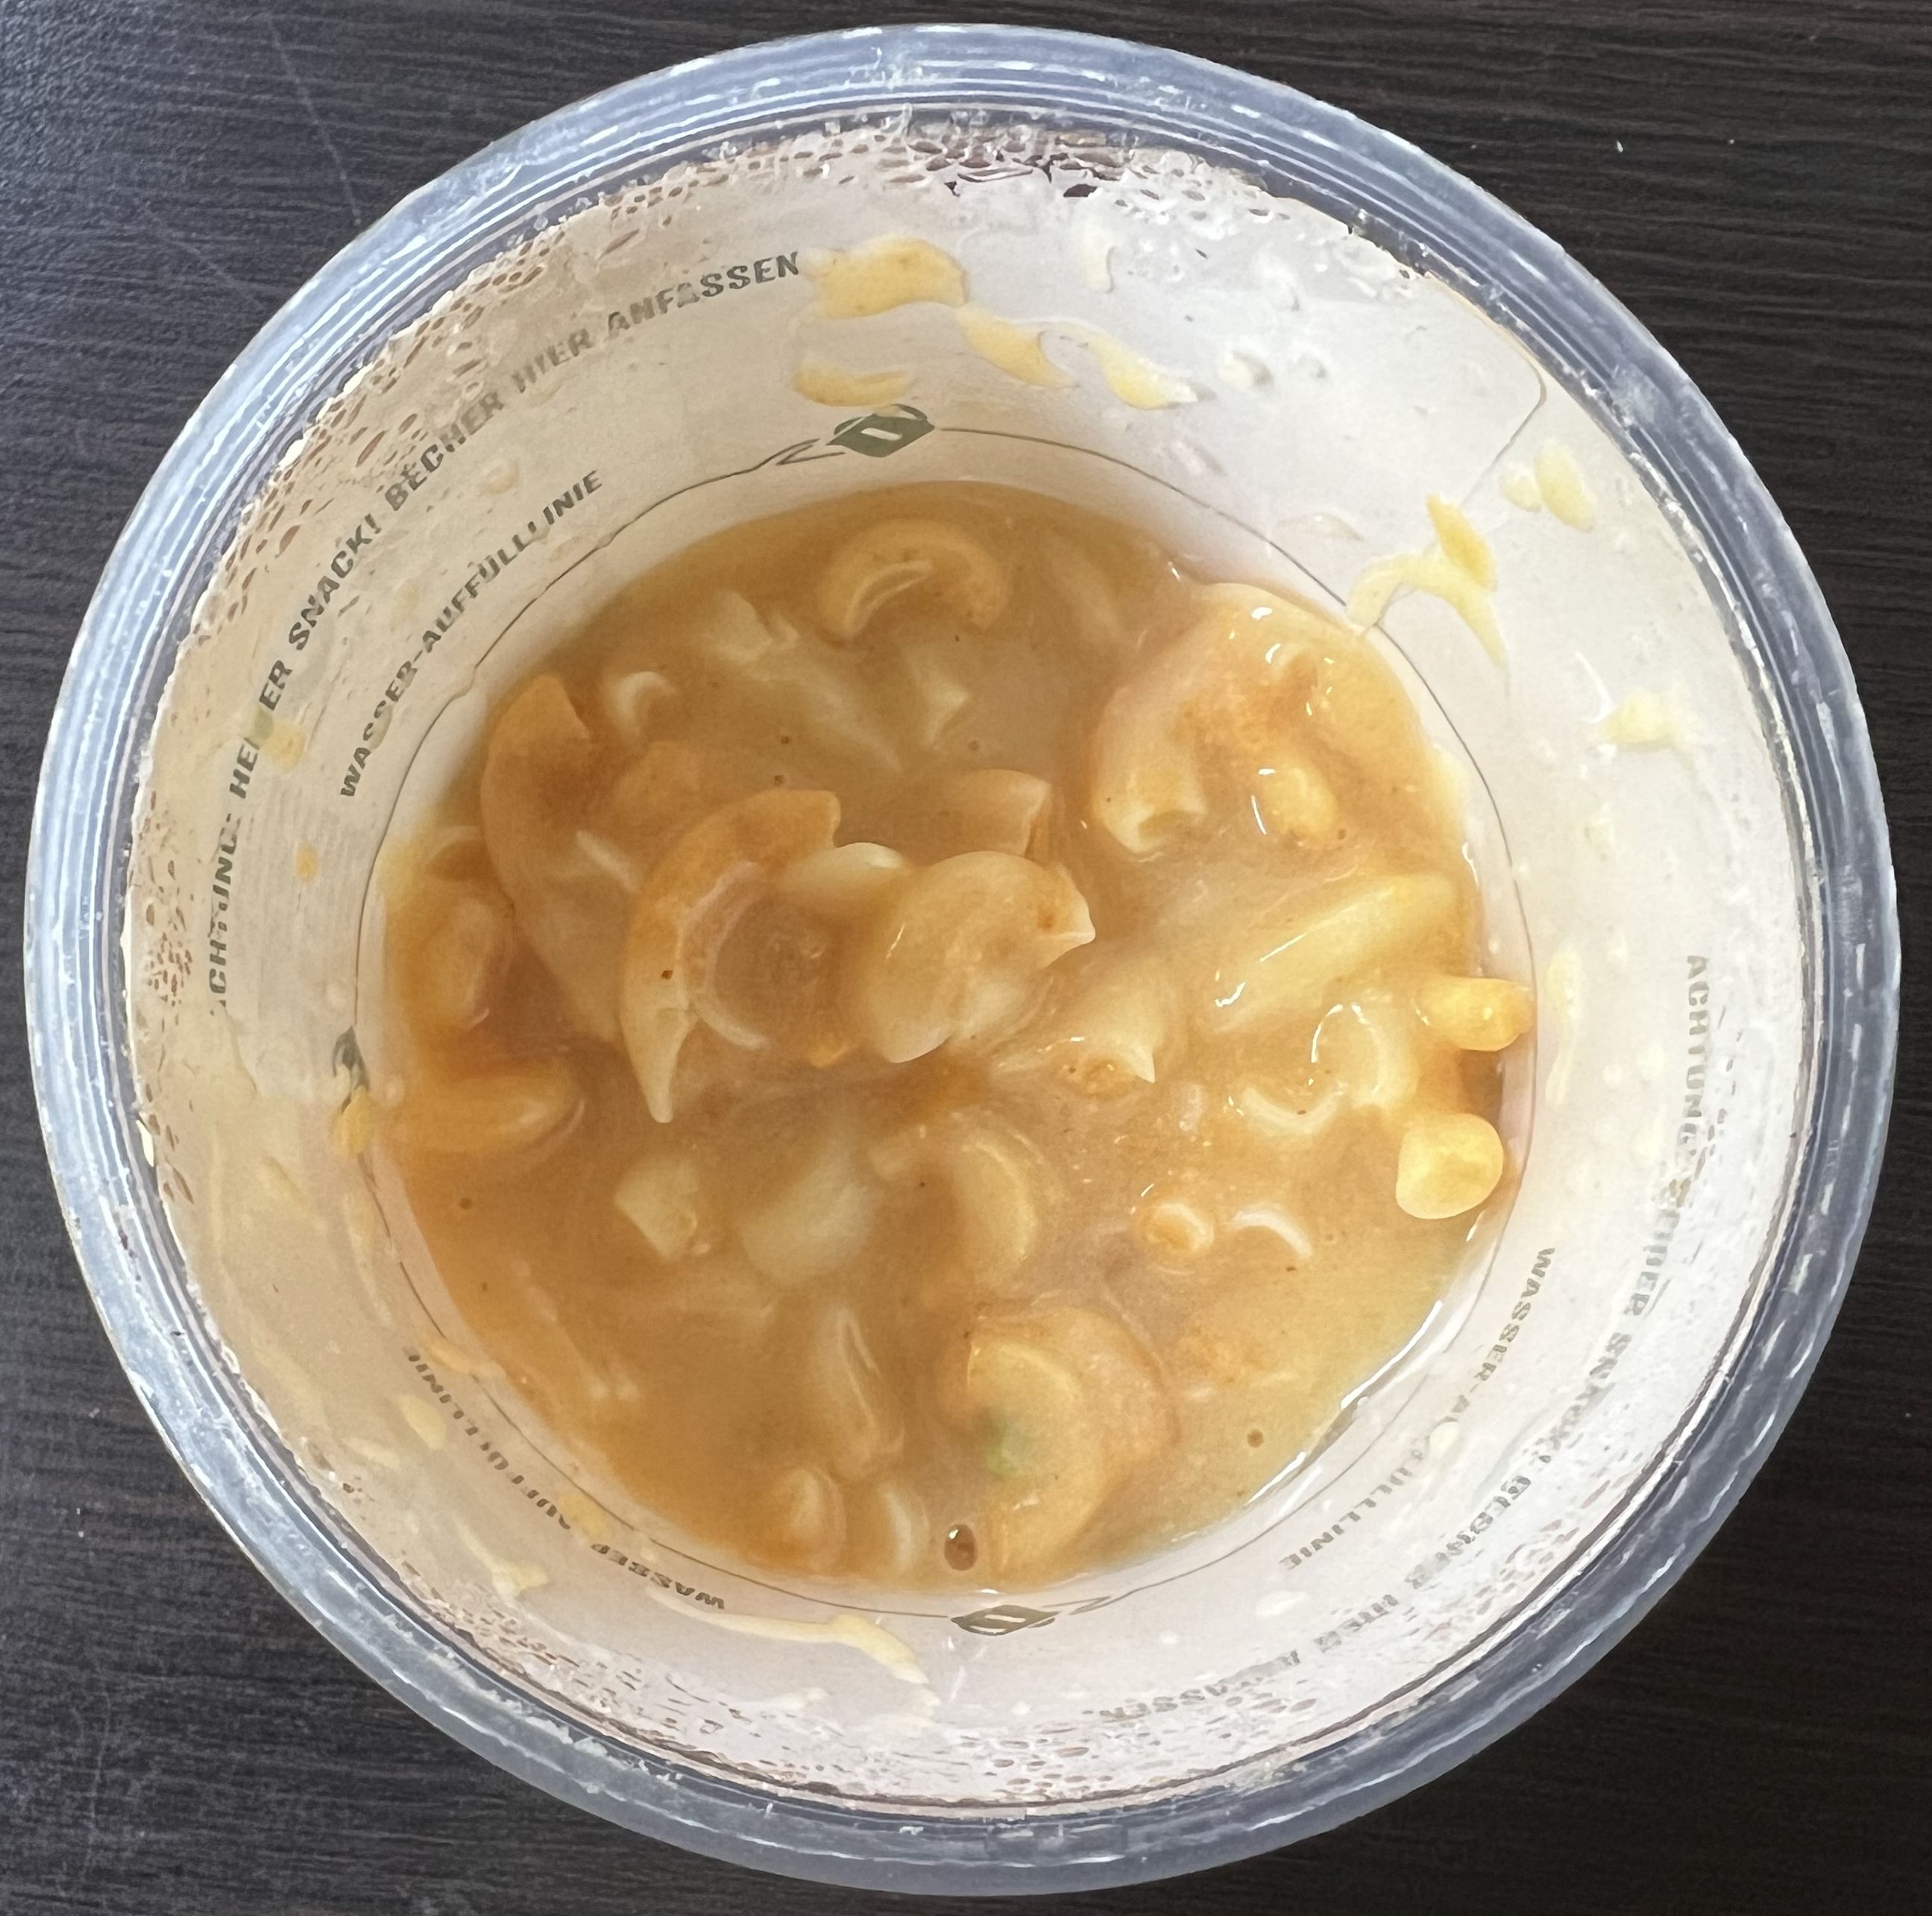 Knorr Mac & Cheese Jalapeno